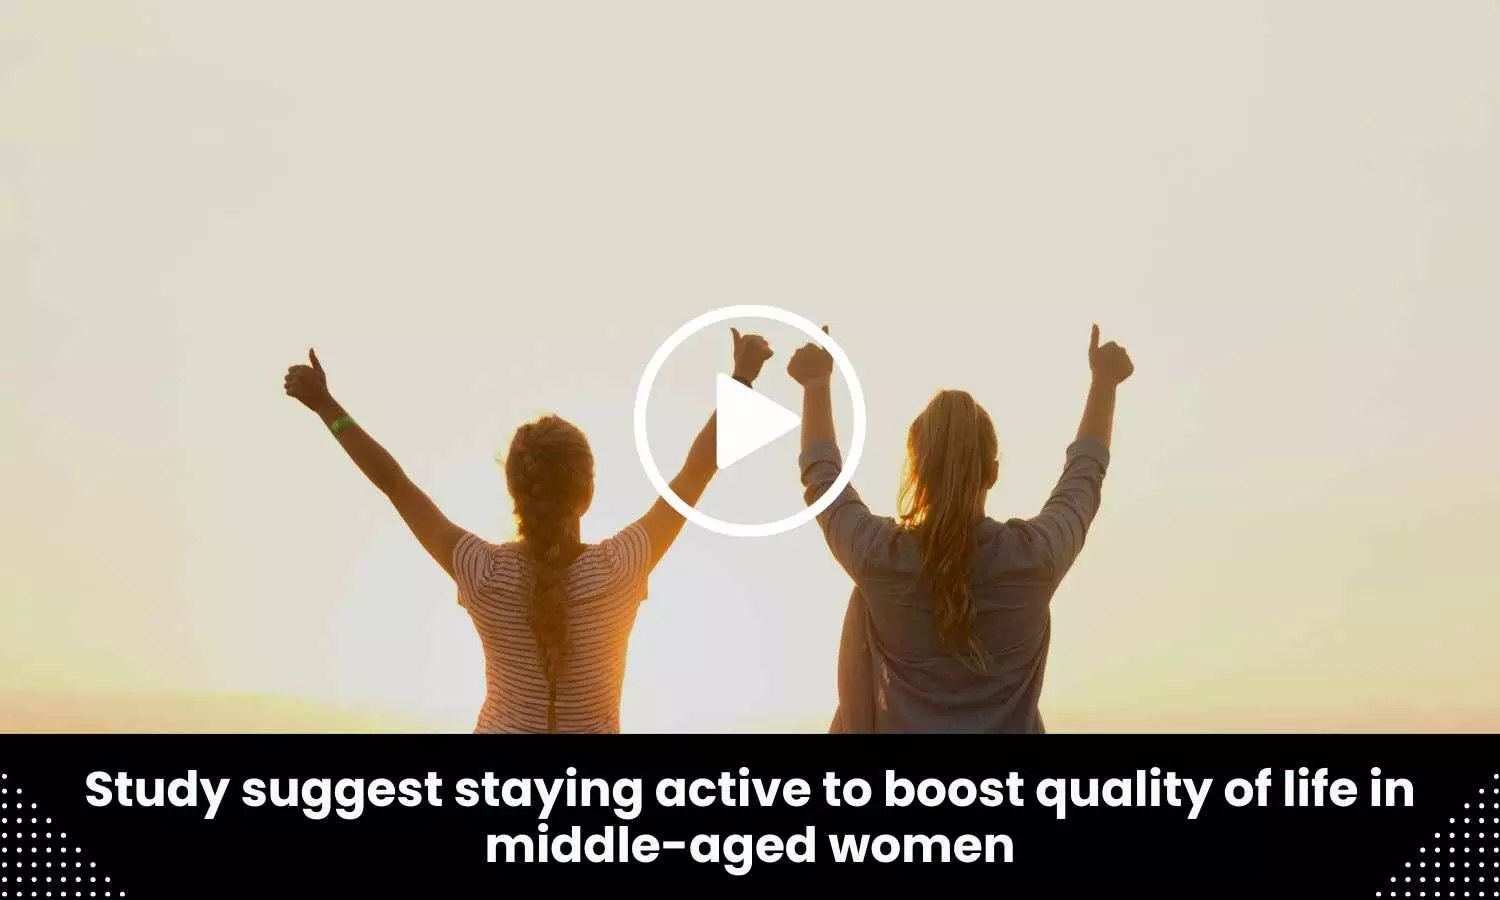 Study suggest staying active to boost quality of life in middle aged women